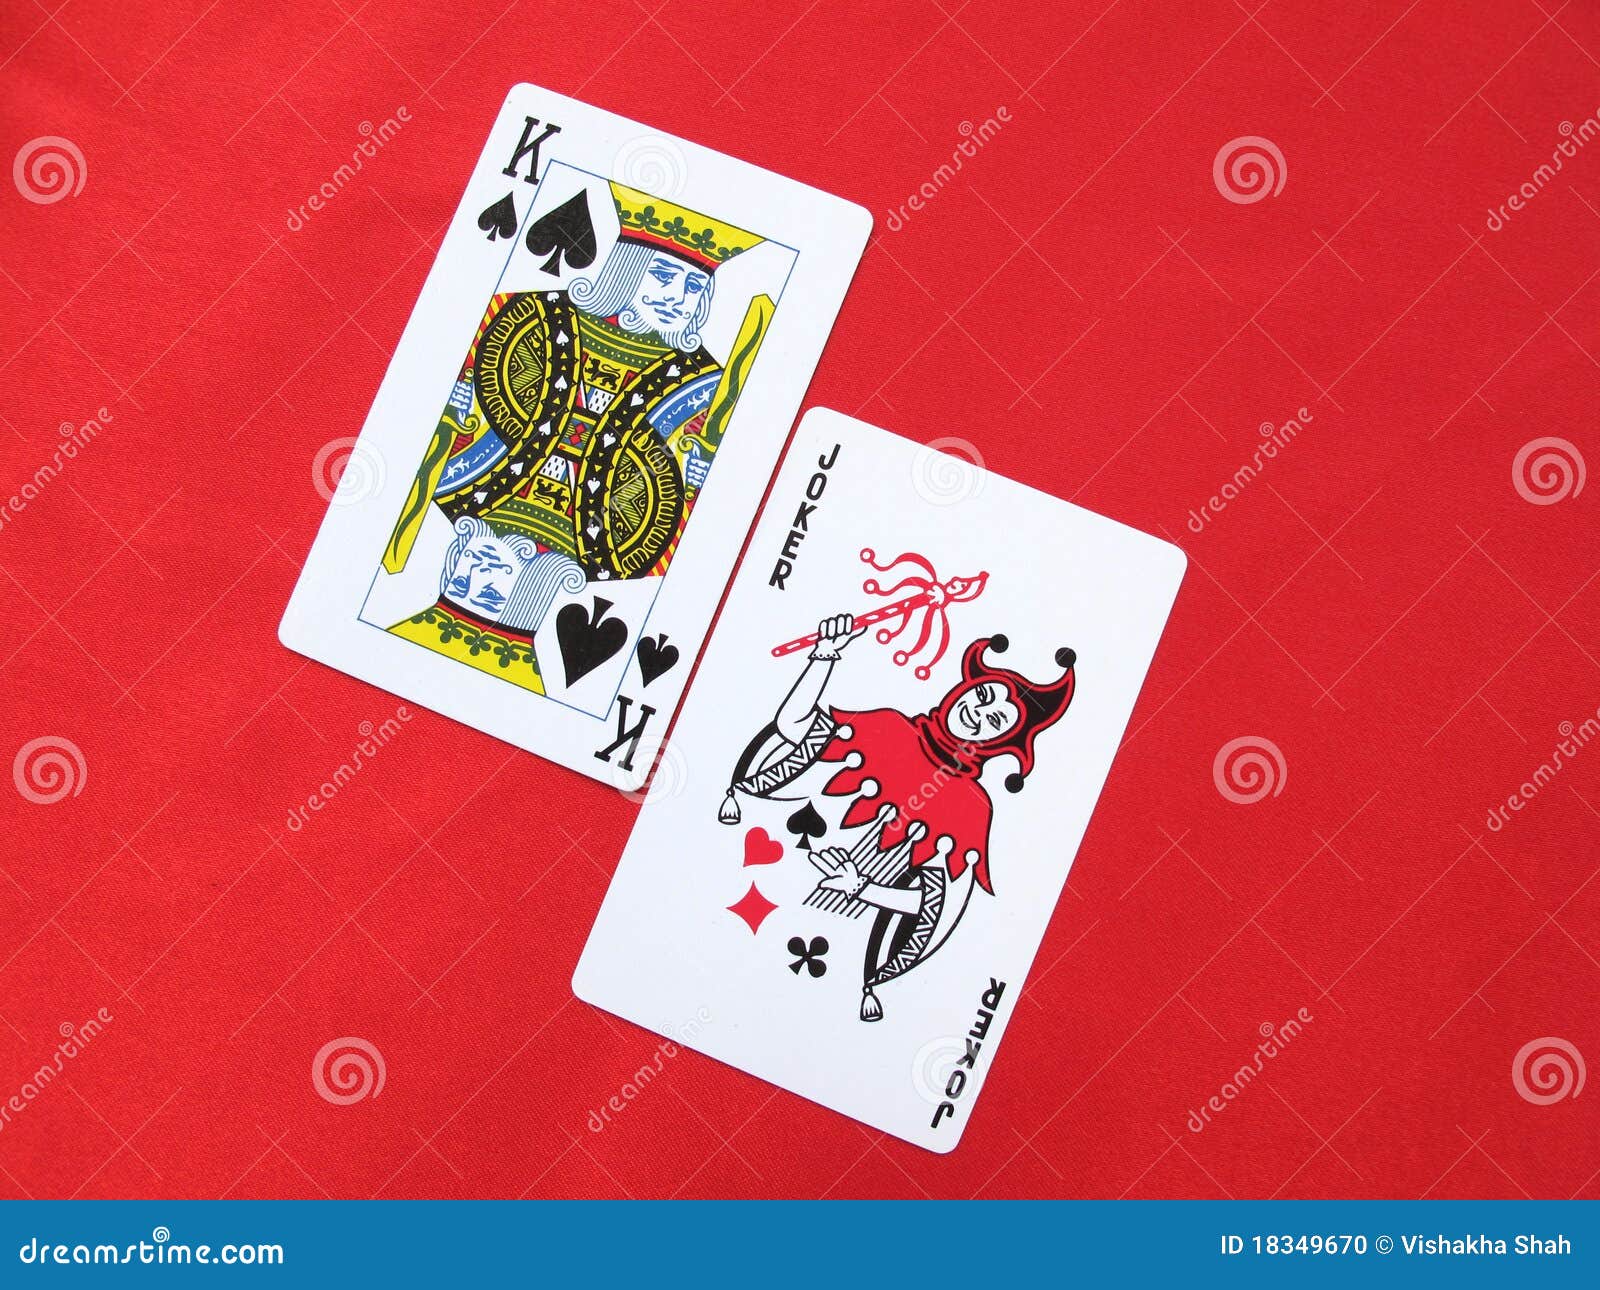 11 132 Joker Photos Free Royalty Free Stock Photos From Dreamstime